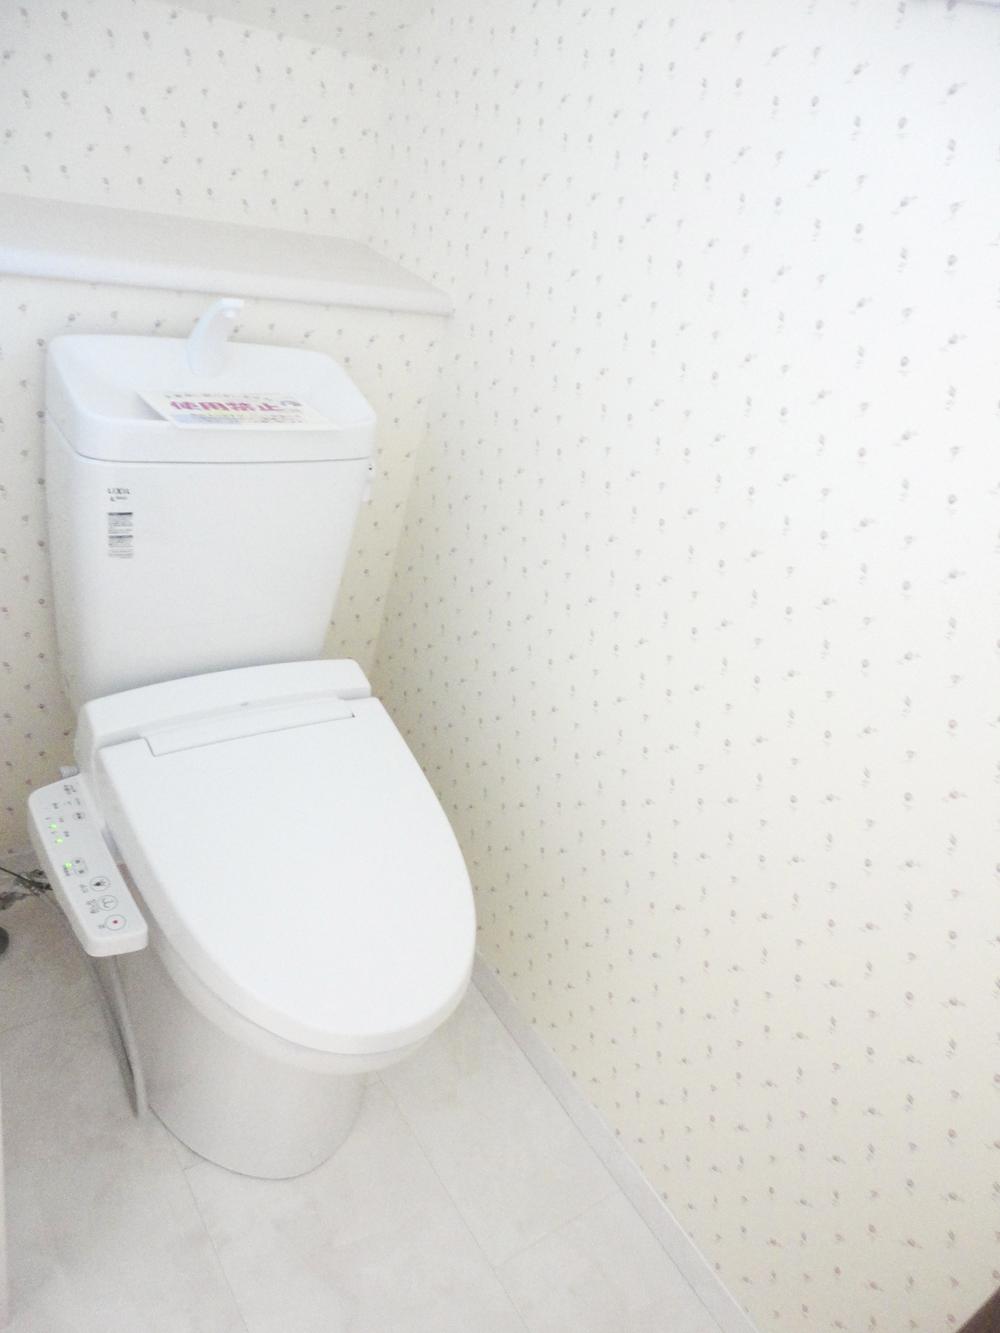 Toilet. Of multi-function hot water heating toilet seat is a toilet (11 May 2013) Shooting